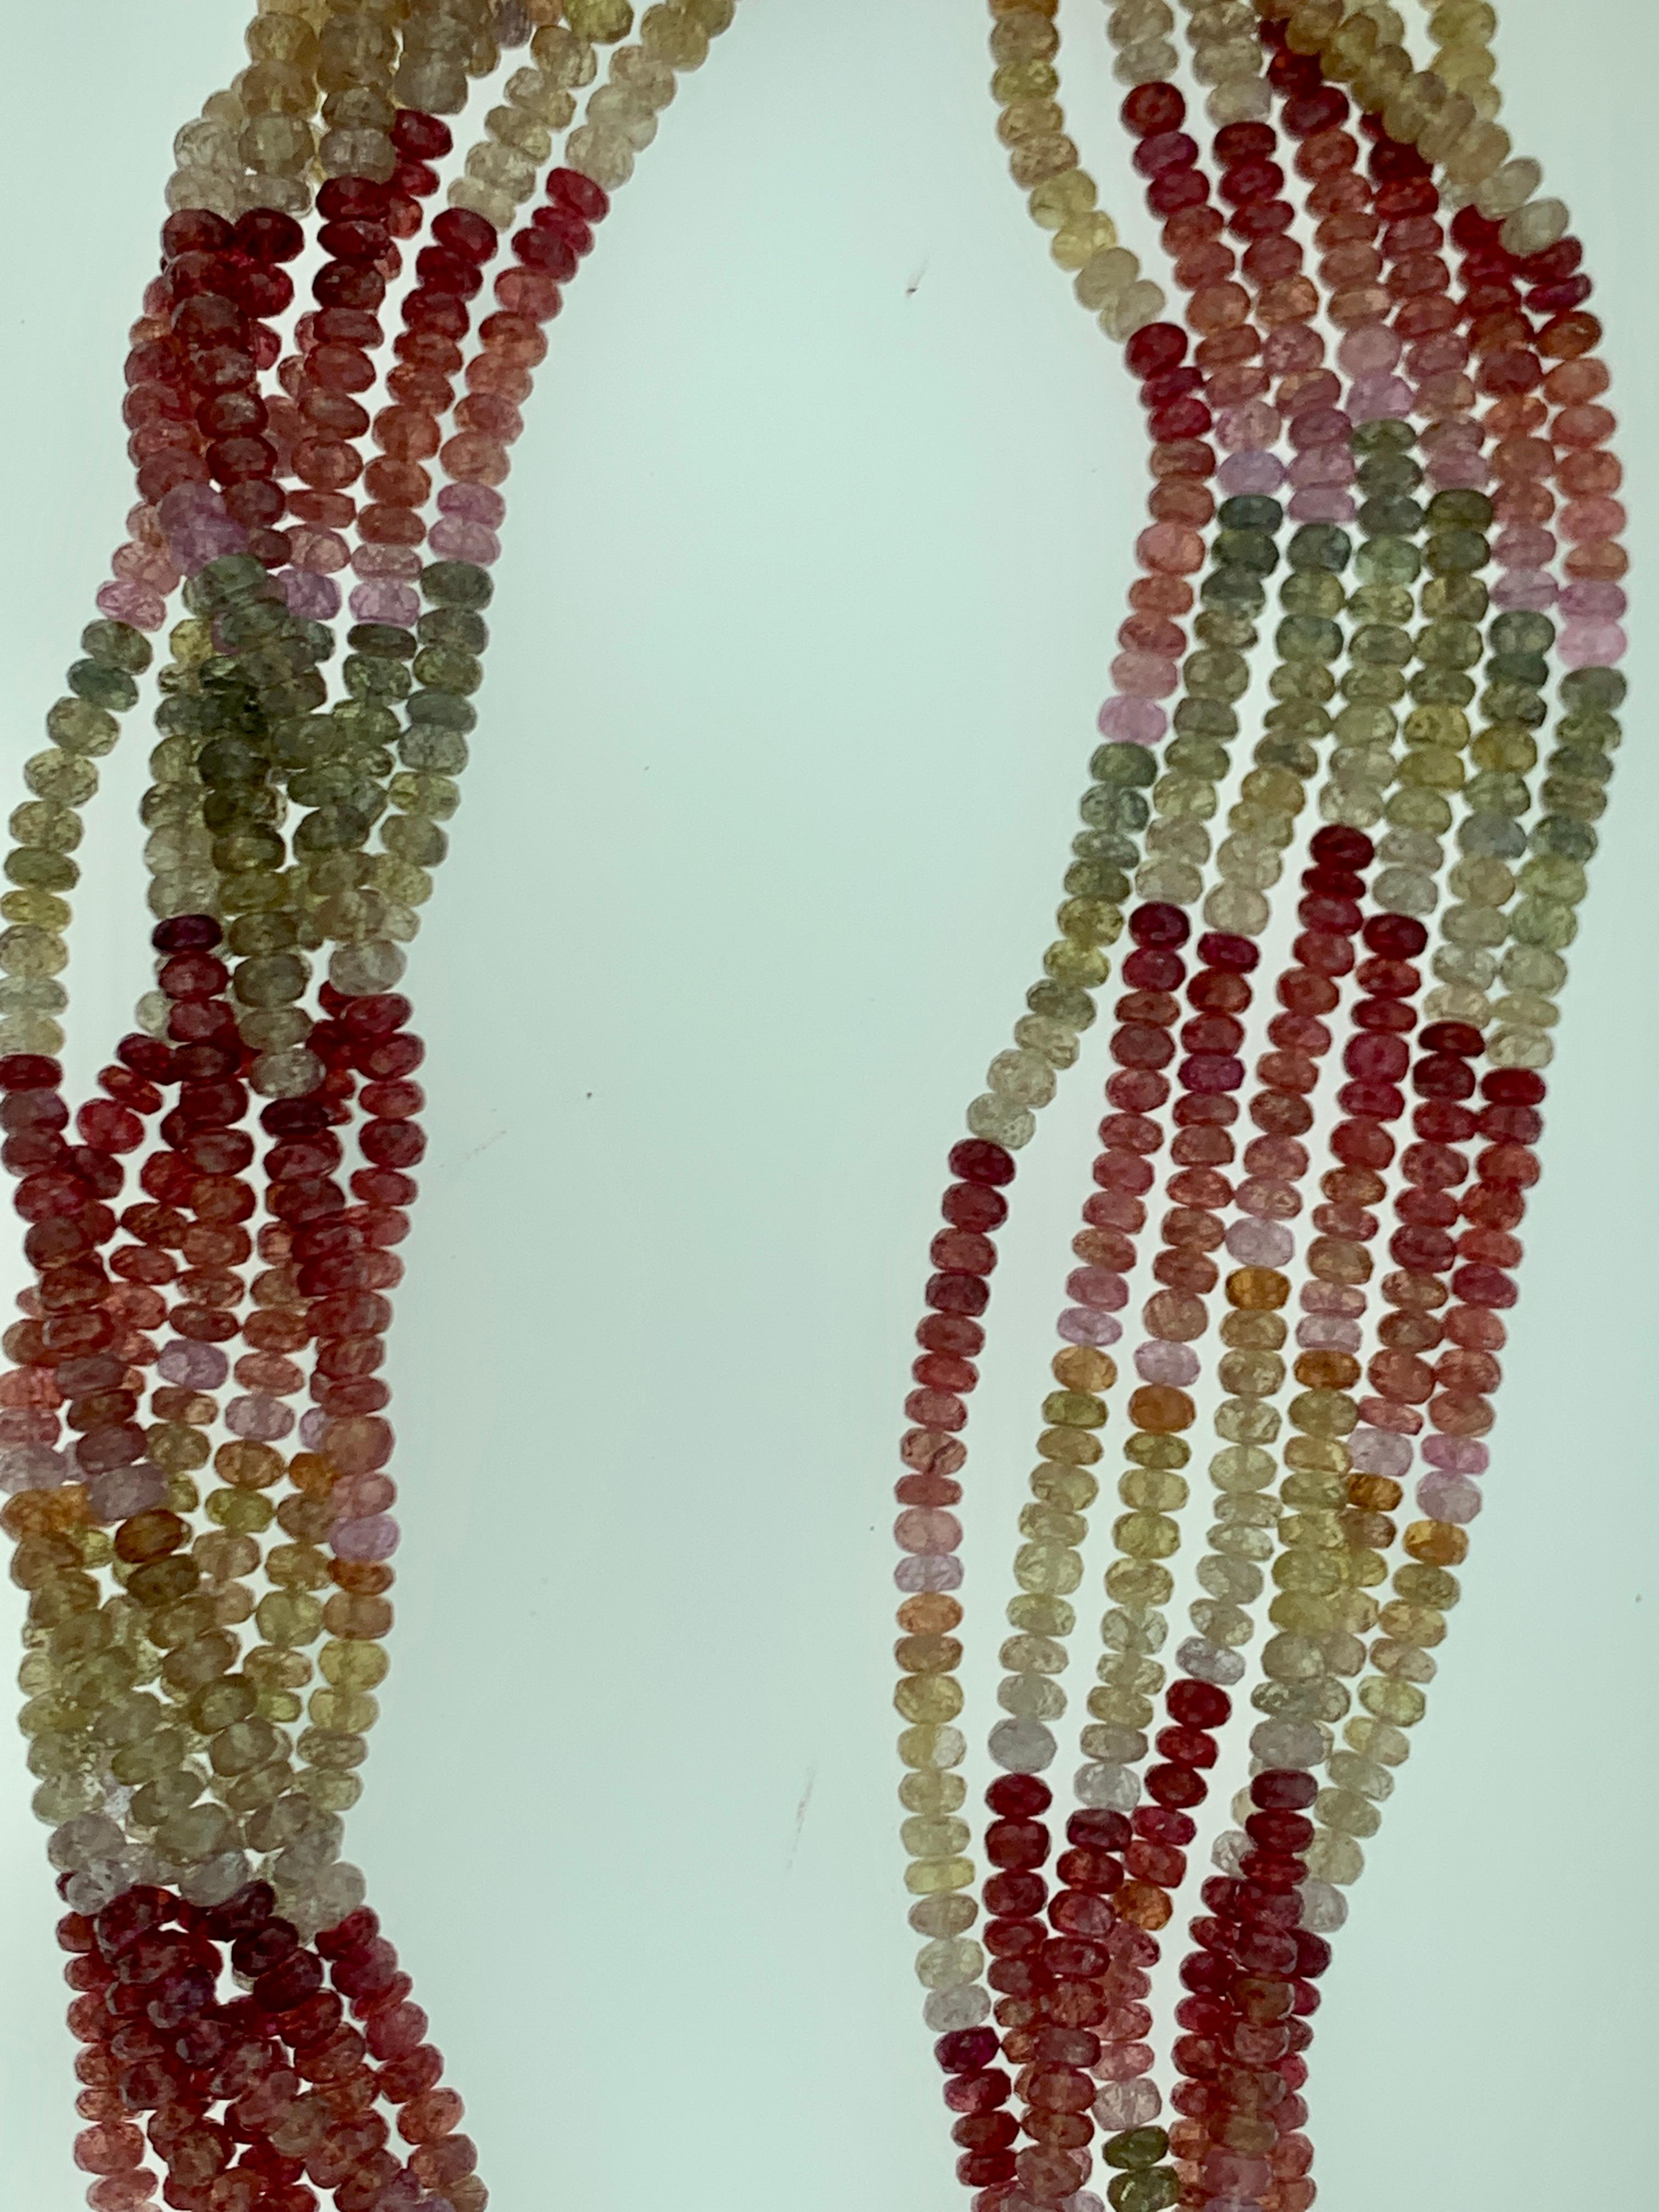  2500 Ct  7 Layer Natural Multi Sapphire Fine Bead Necklace 18 Karat White  Gold  Clasp
This spectacular Necklace   consisting of approximately 2500 Ct   of  Fine Multi Sapphire  Beads.
Colors are different shades of pink , Green , Brown
Amazing